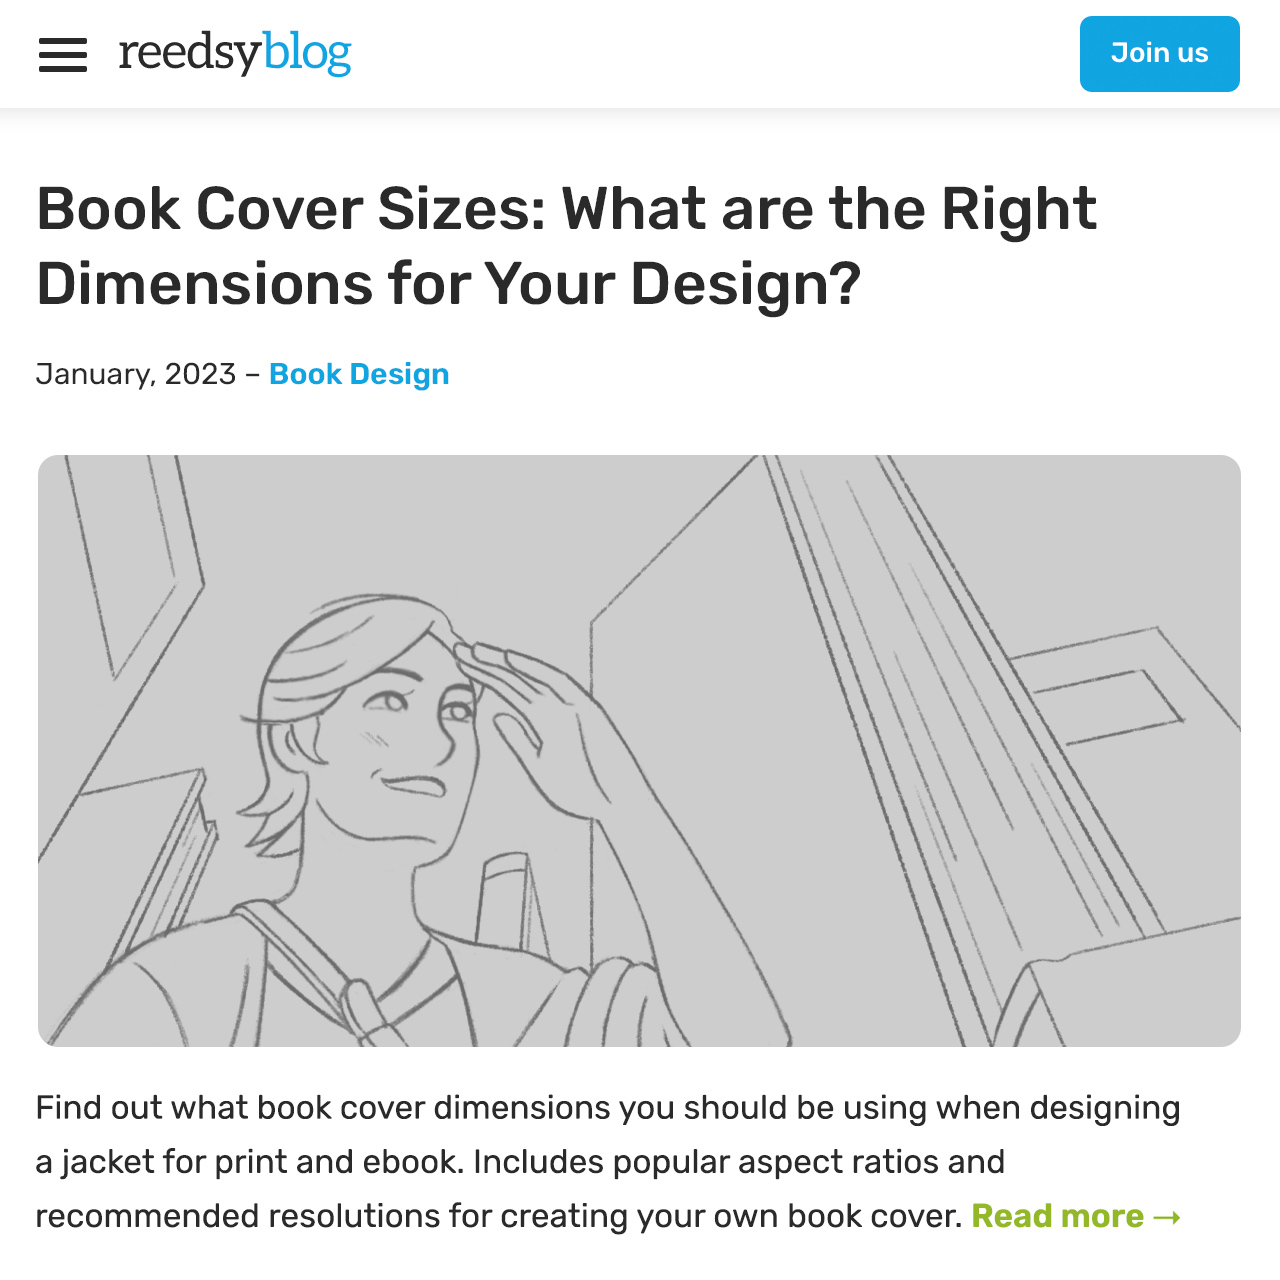 Book Cover Sizes: What are the Right Dimensions for Your Design?